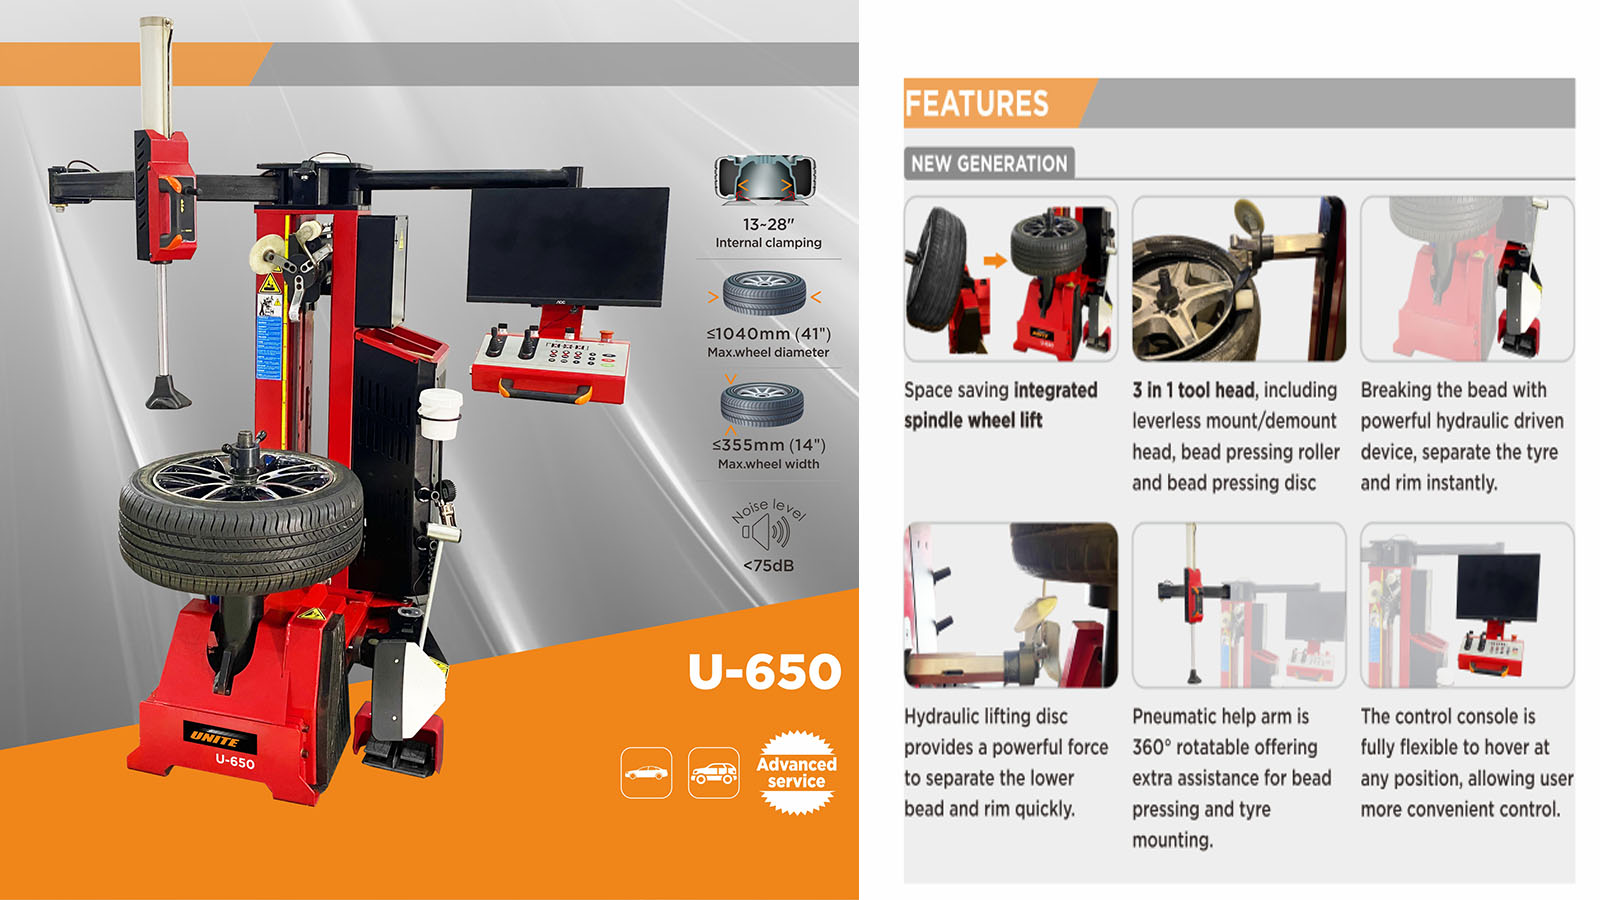 The Revolutionary U-650 Fully Automatic Leverless Tyre Changer